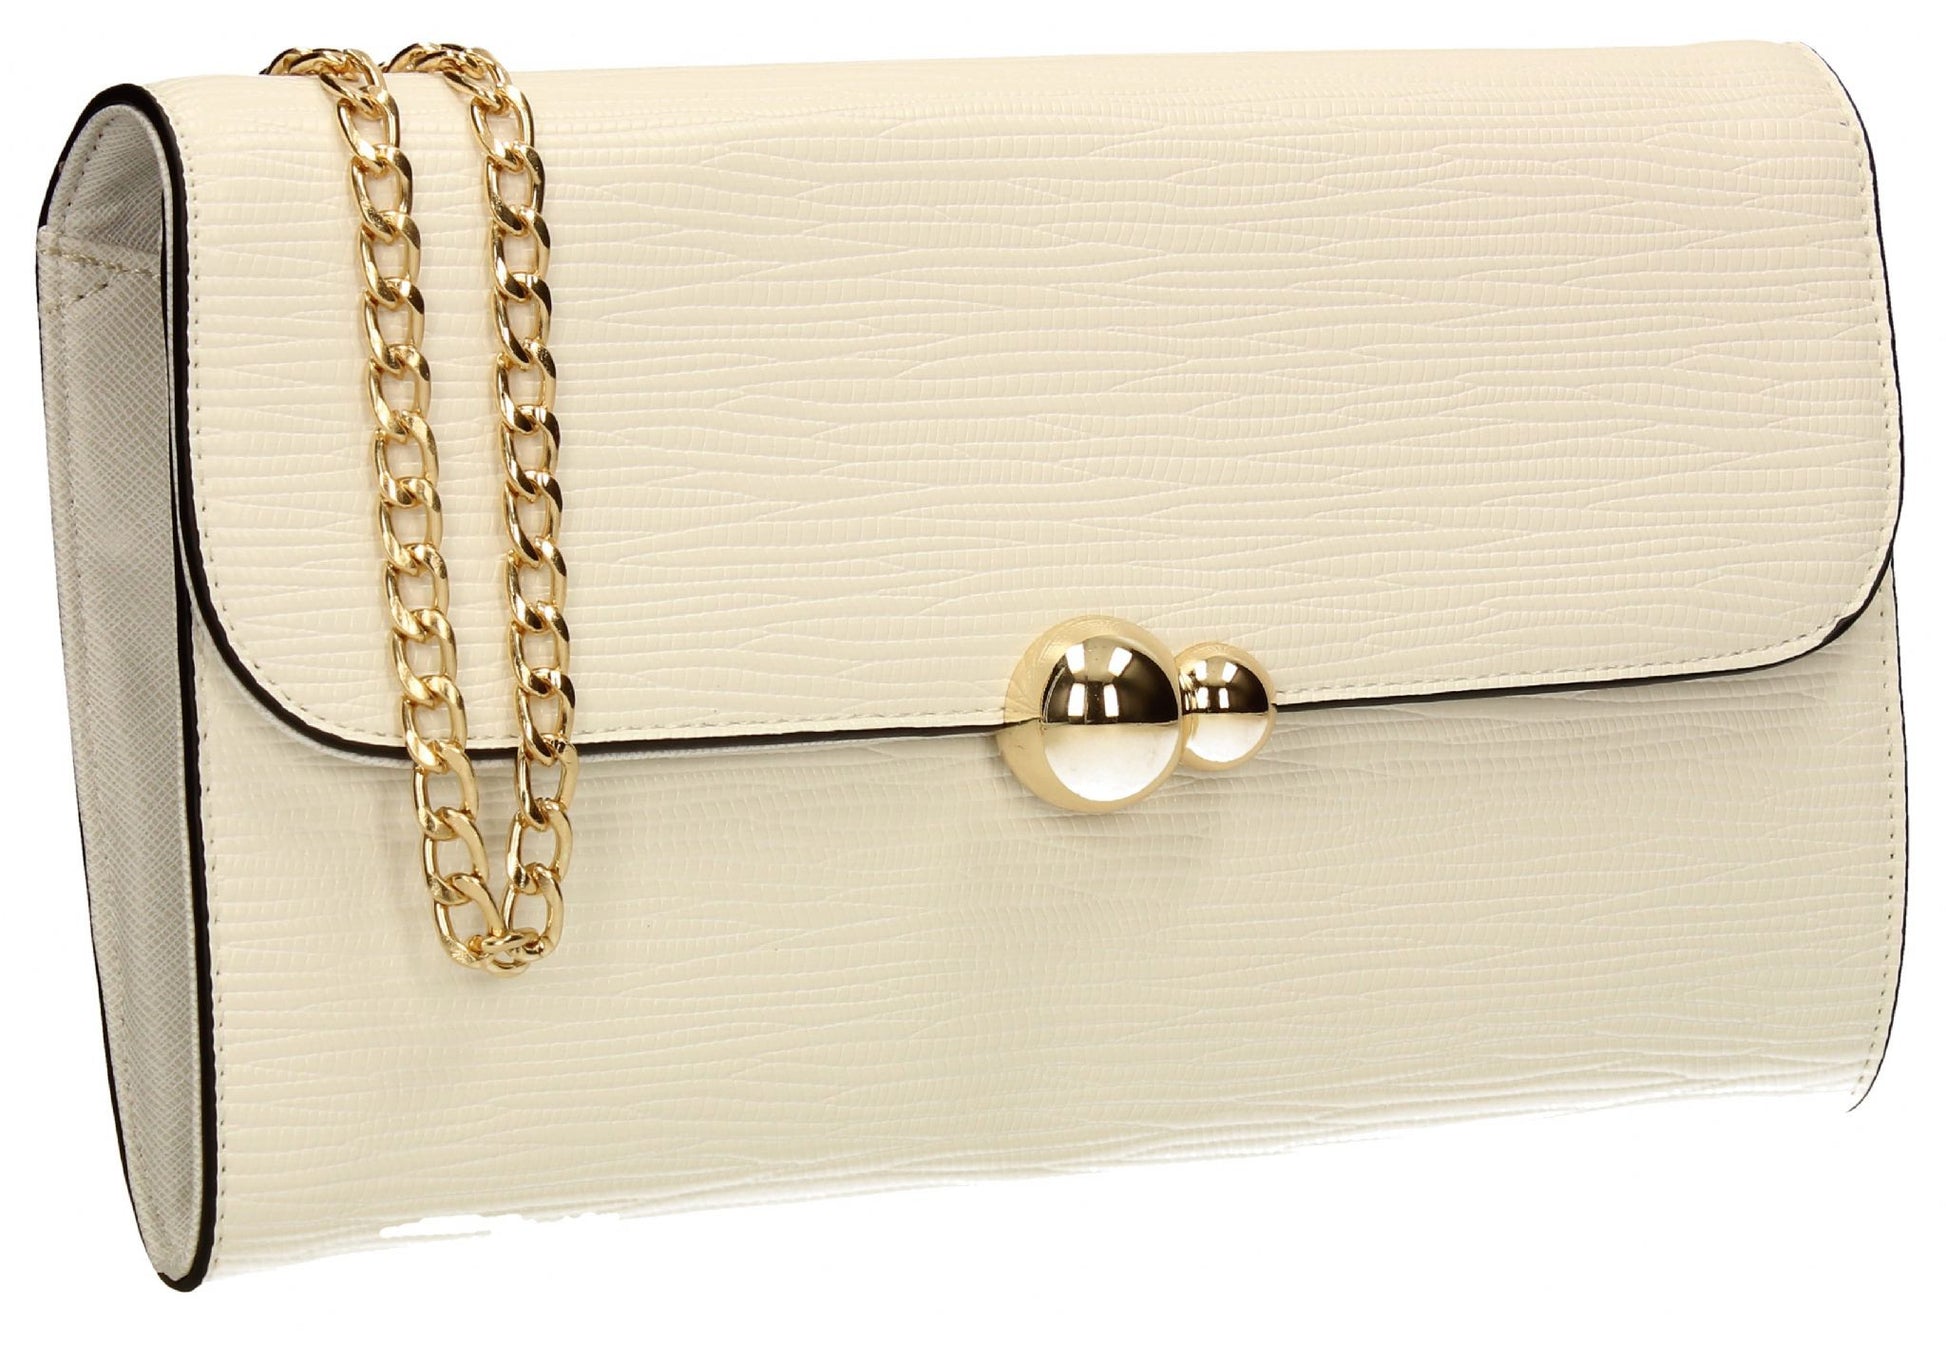 SWANKYSWANS Violet Clutch Bag White Cute Cheap Clutch Bag For Weddings School and Work